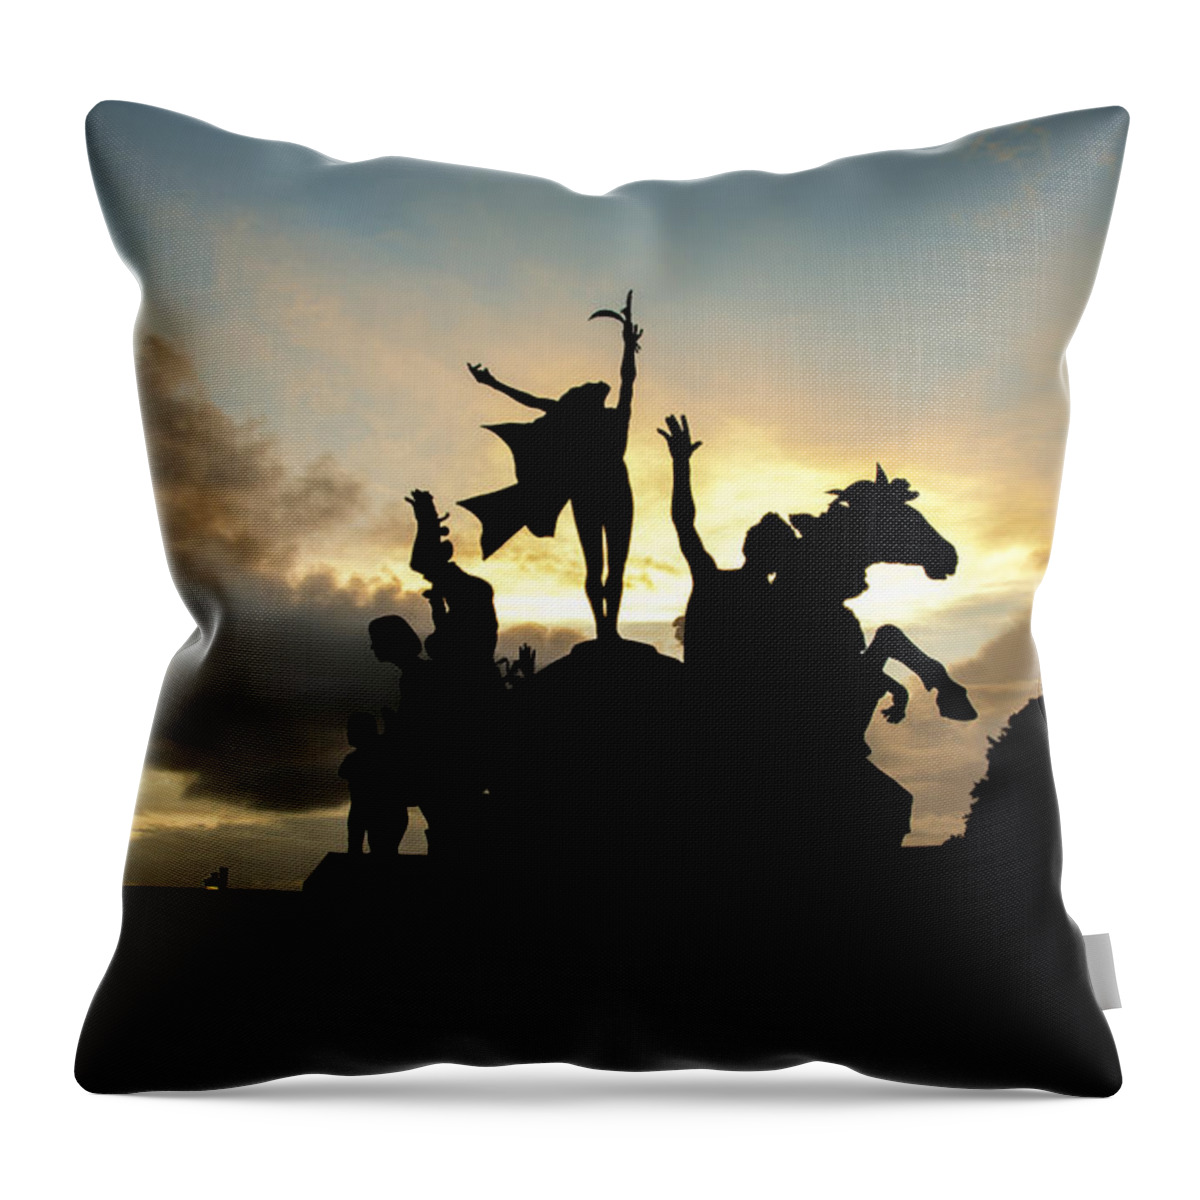 Landscape Throw Pillow featuring the photograph Sunset Silhouette by Theodore Jones